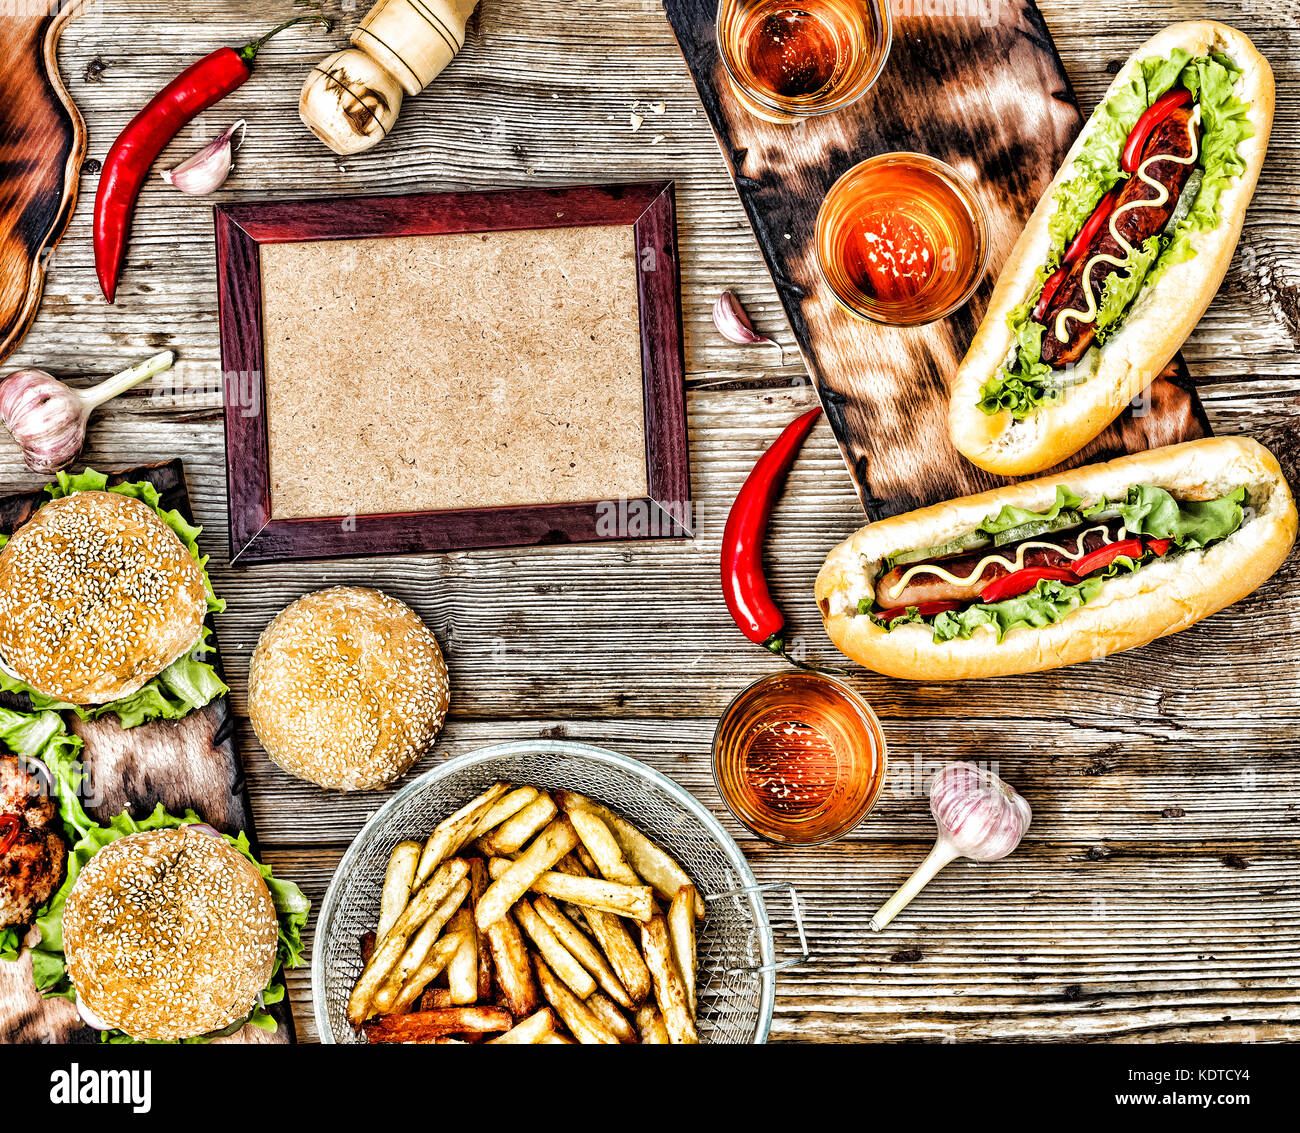 Rustic style, top view homemade burgers with beef, hot dogs and beer on a wooden table. Stock Photo